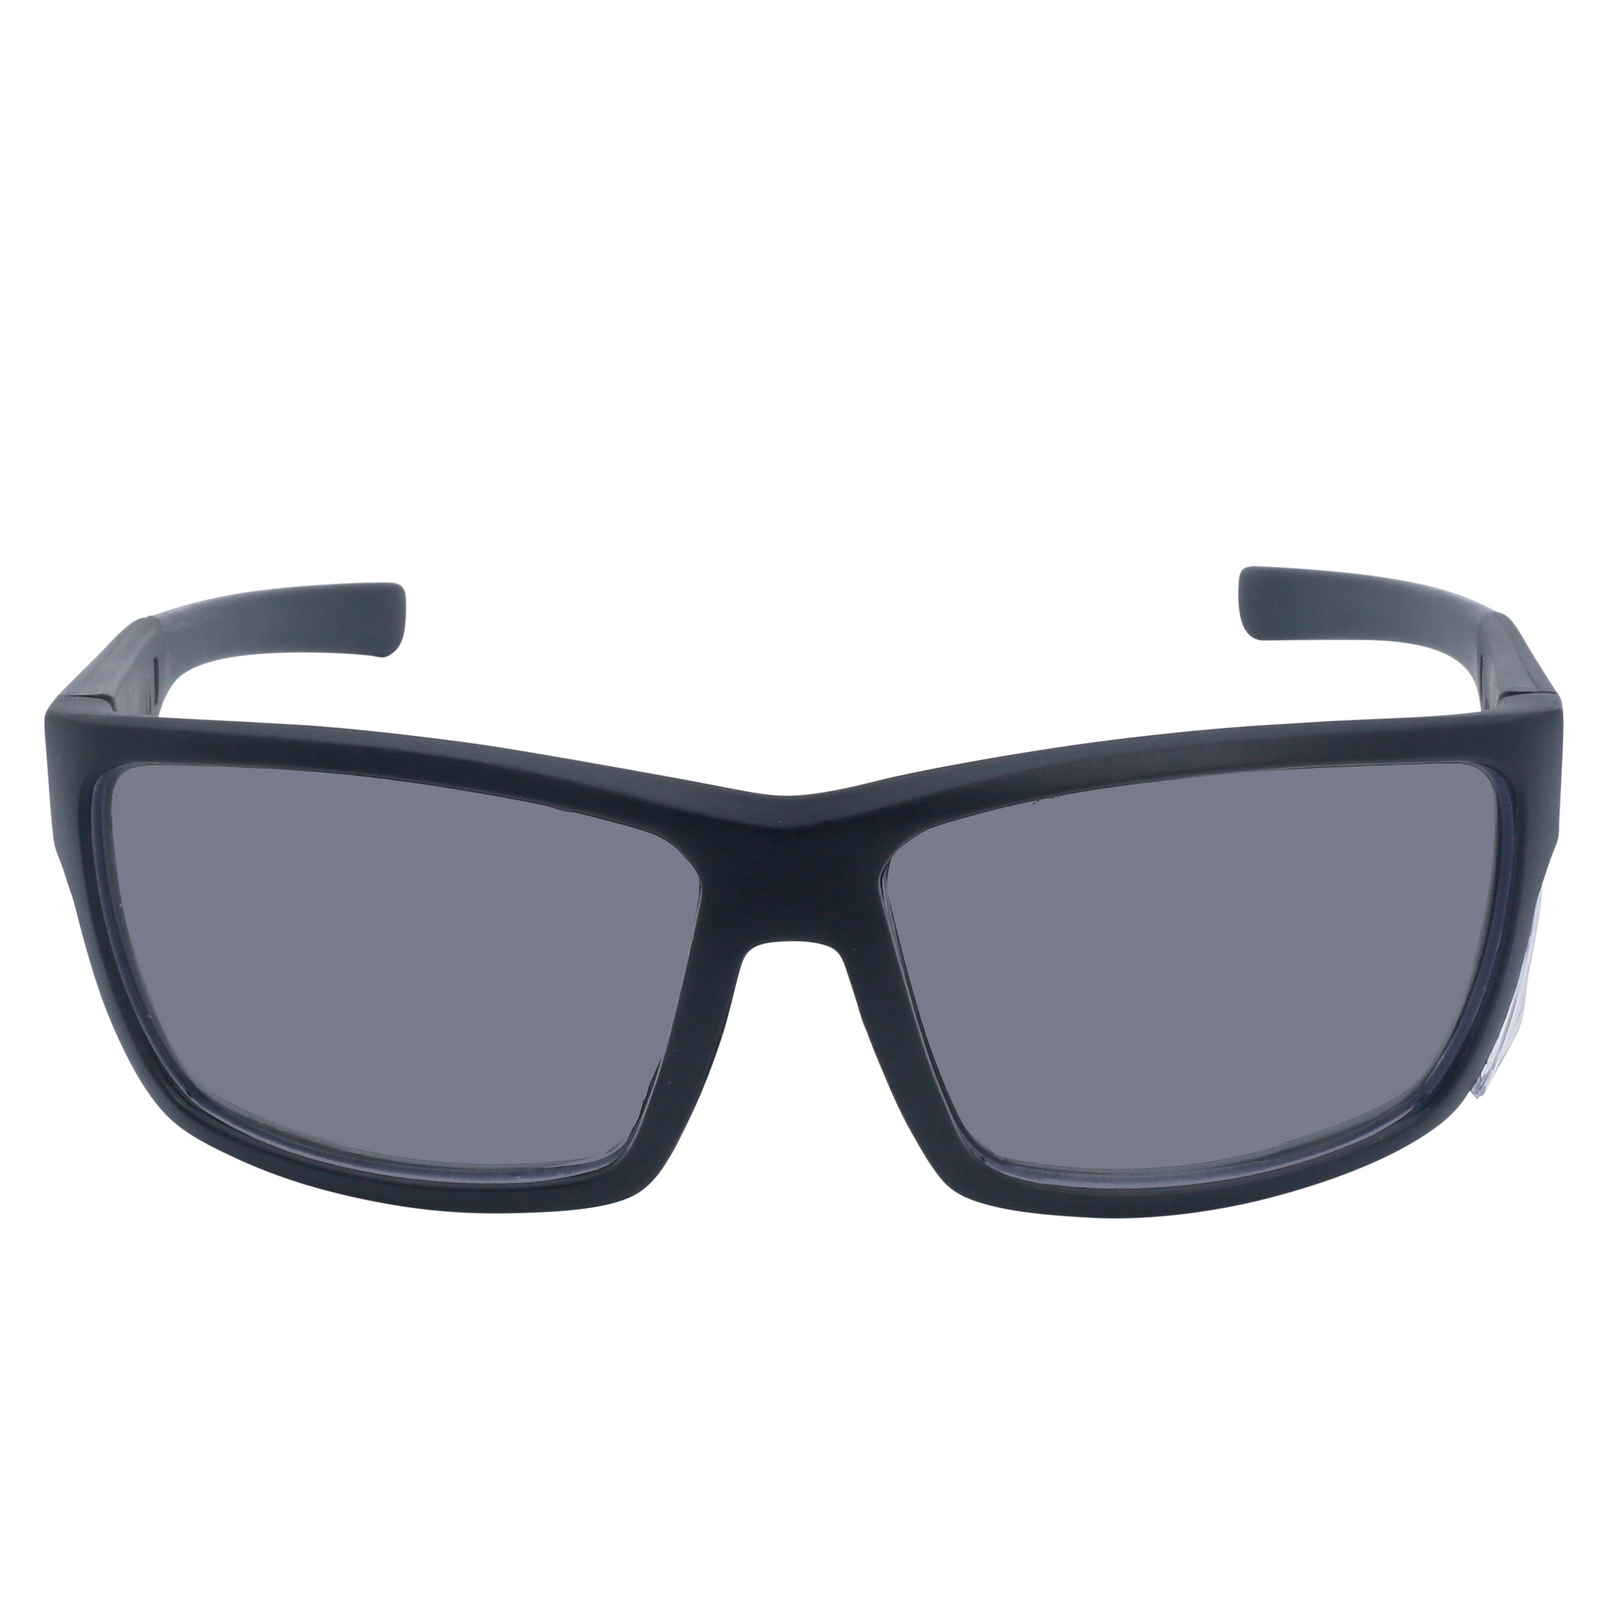 Image shows a front view of the smoke JORESTECH safety sun glasses with clear side shield for high impact protection. These safety glasses are ANSI compliant and have black frame and smoke polycarbonate lenses. The background of the image is white